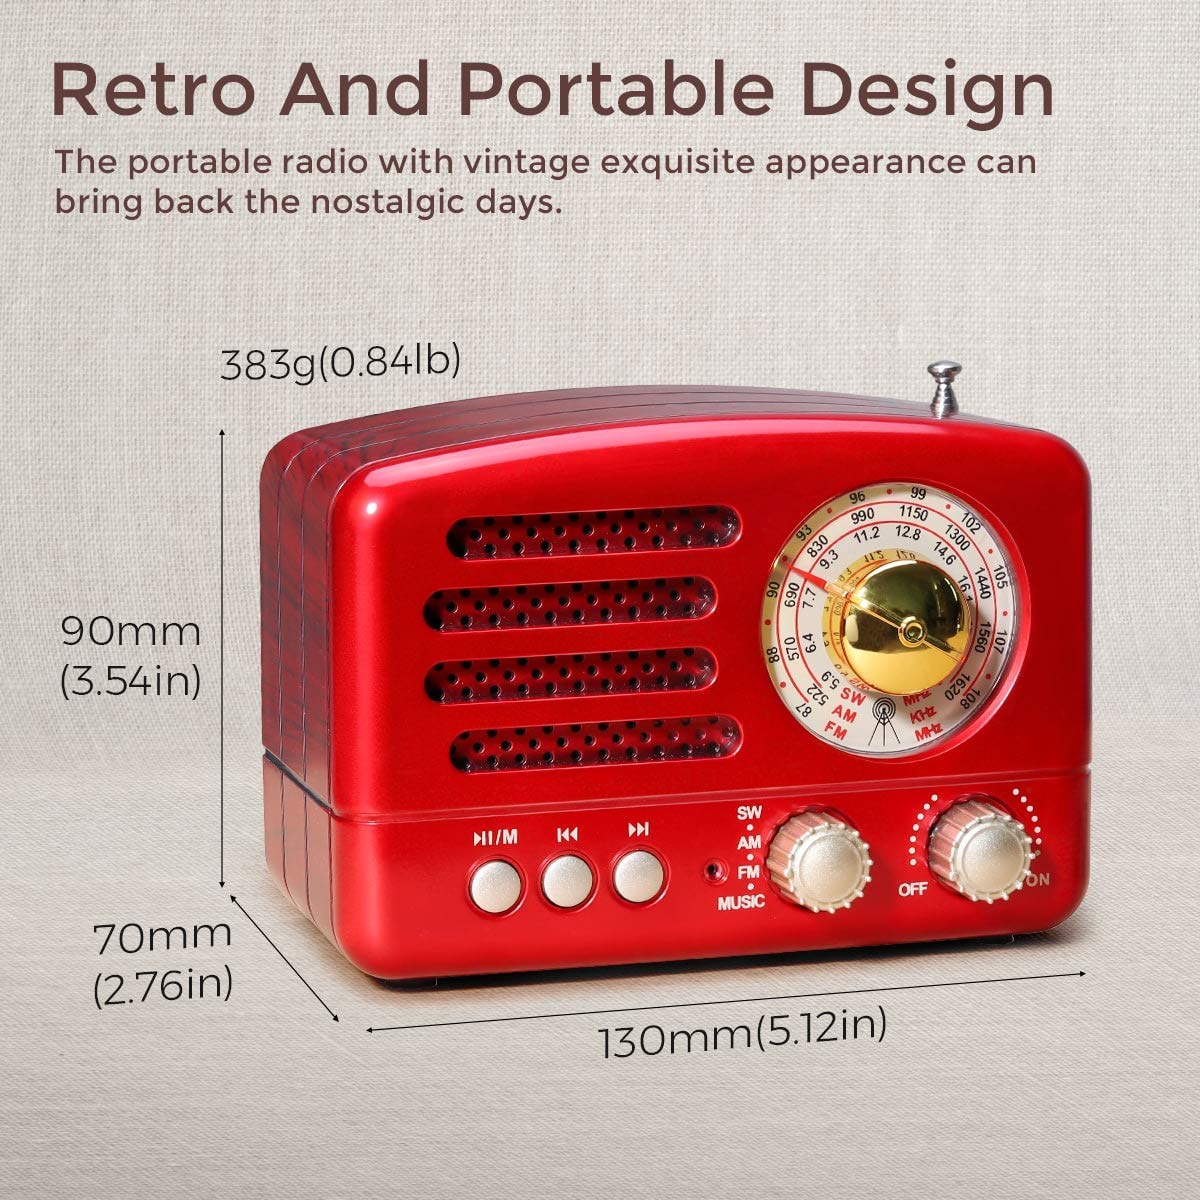 PRUNUS J-160 Portable Radio Retro, SW AM FM Radio Small with Bluetooth Speaker, Transistor radio Battery Operated,upgrade 1800mAh Rechargeable Battery,Supports TF Card/AUX/USB MP3 Player (Red)